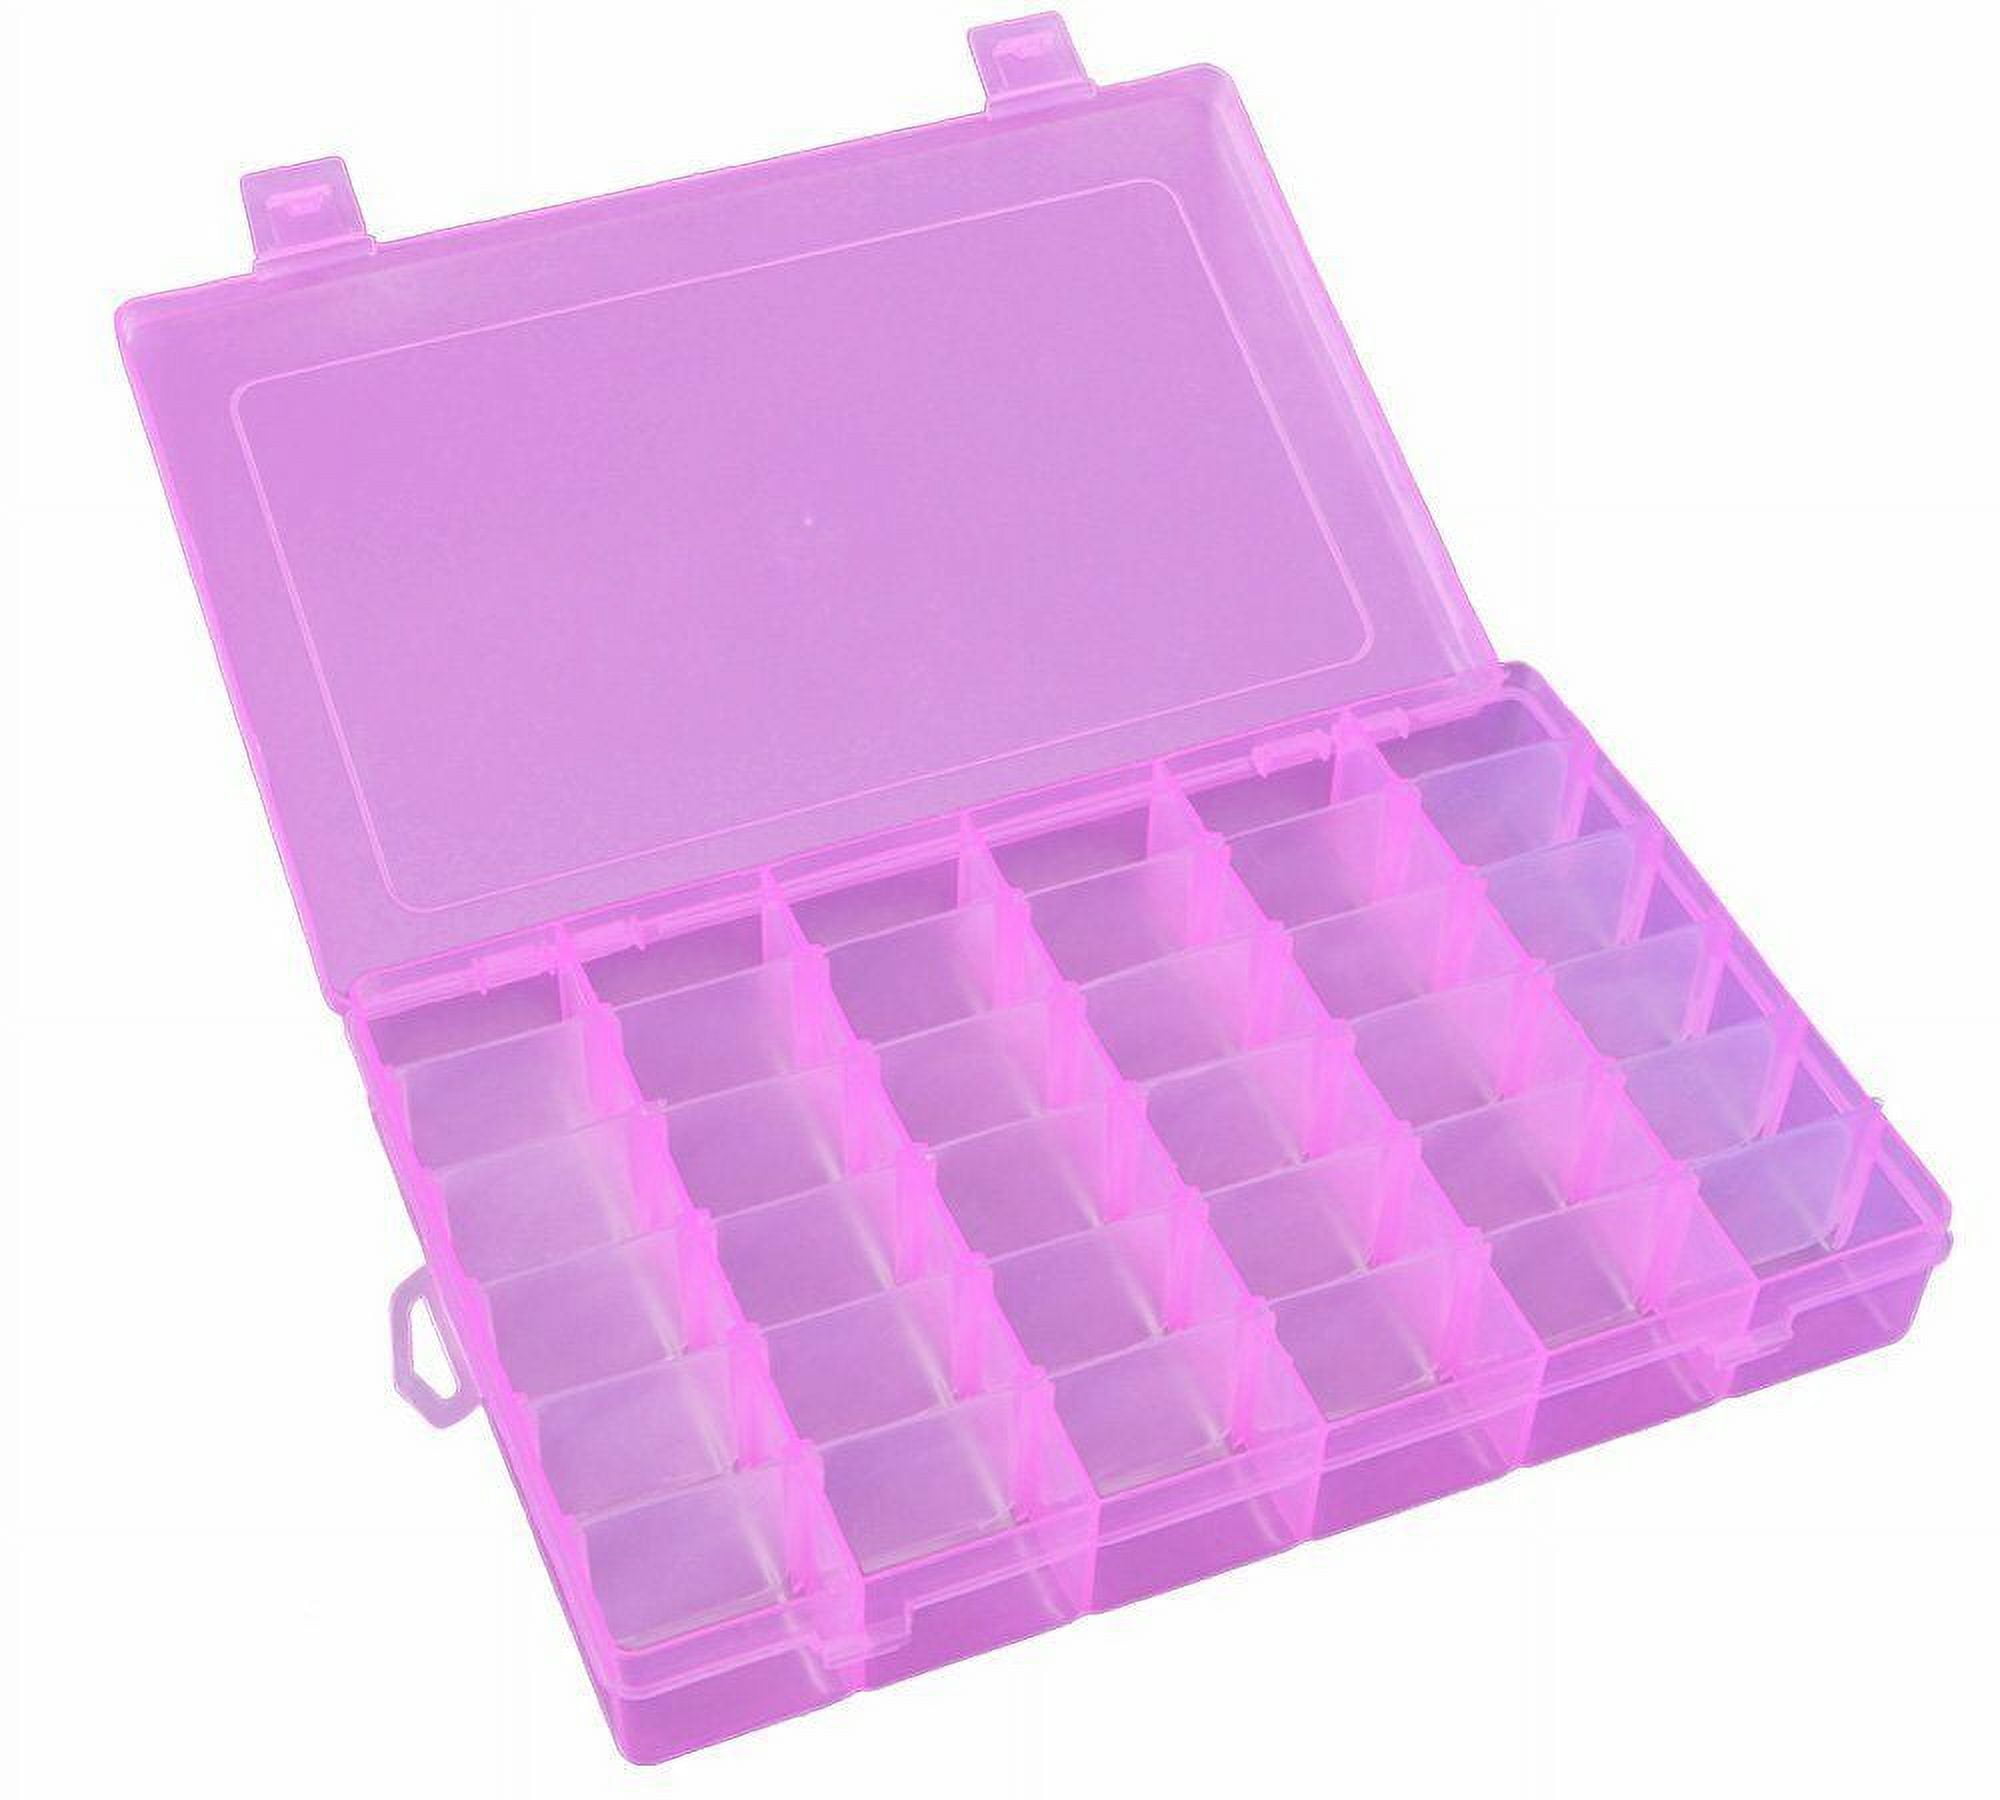 Snowkingdom Plastic Grid Box Storage Organizer Case for Display Collection  with Adjustable Dividers - 3 Pack (1pc 36 Grids + 2pc 15 Grids) - Free  Letter Stickers 36 Grid+2* 15 Grid